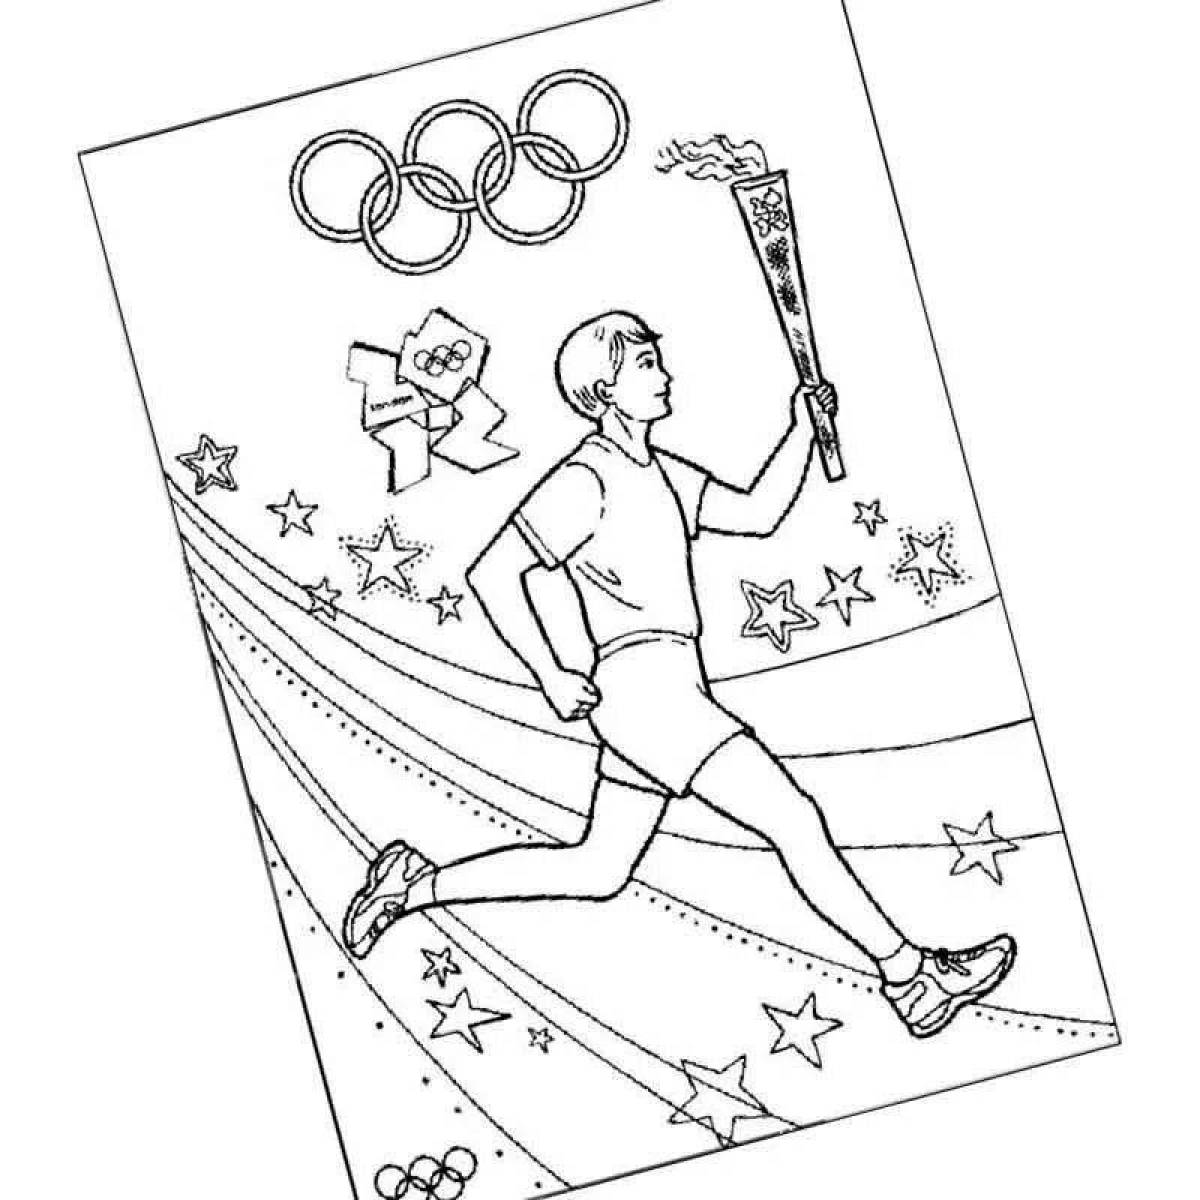 Coloring book shiny olympic winter sports